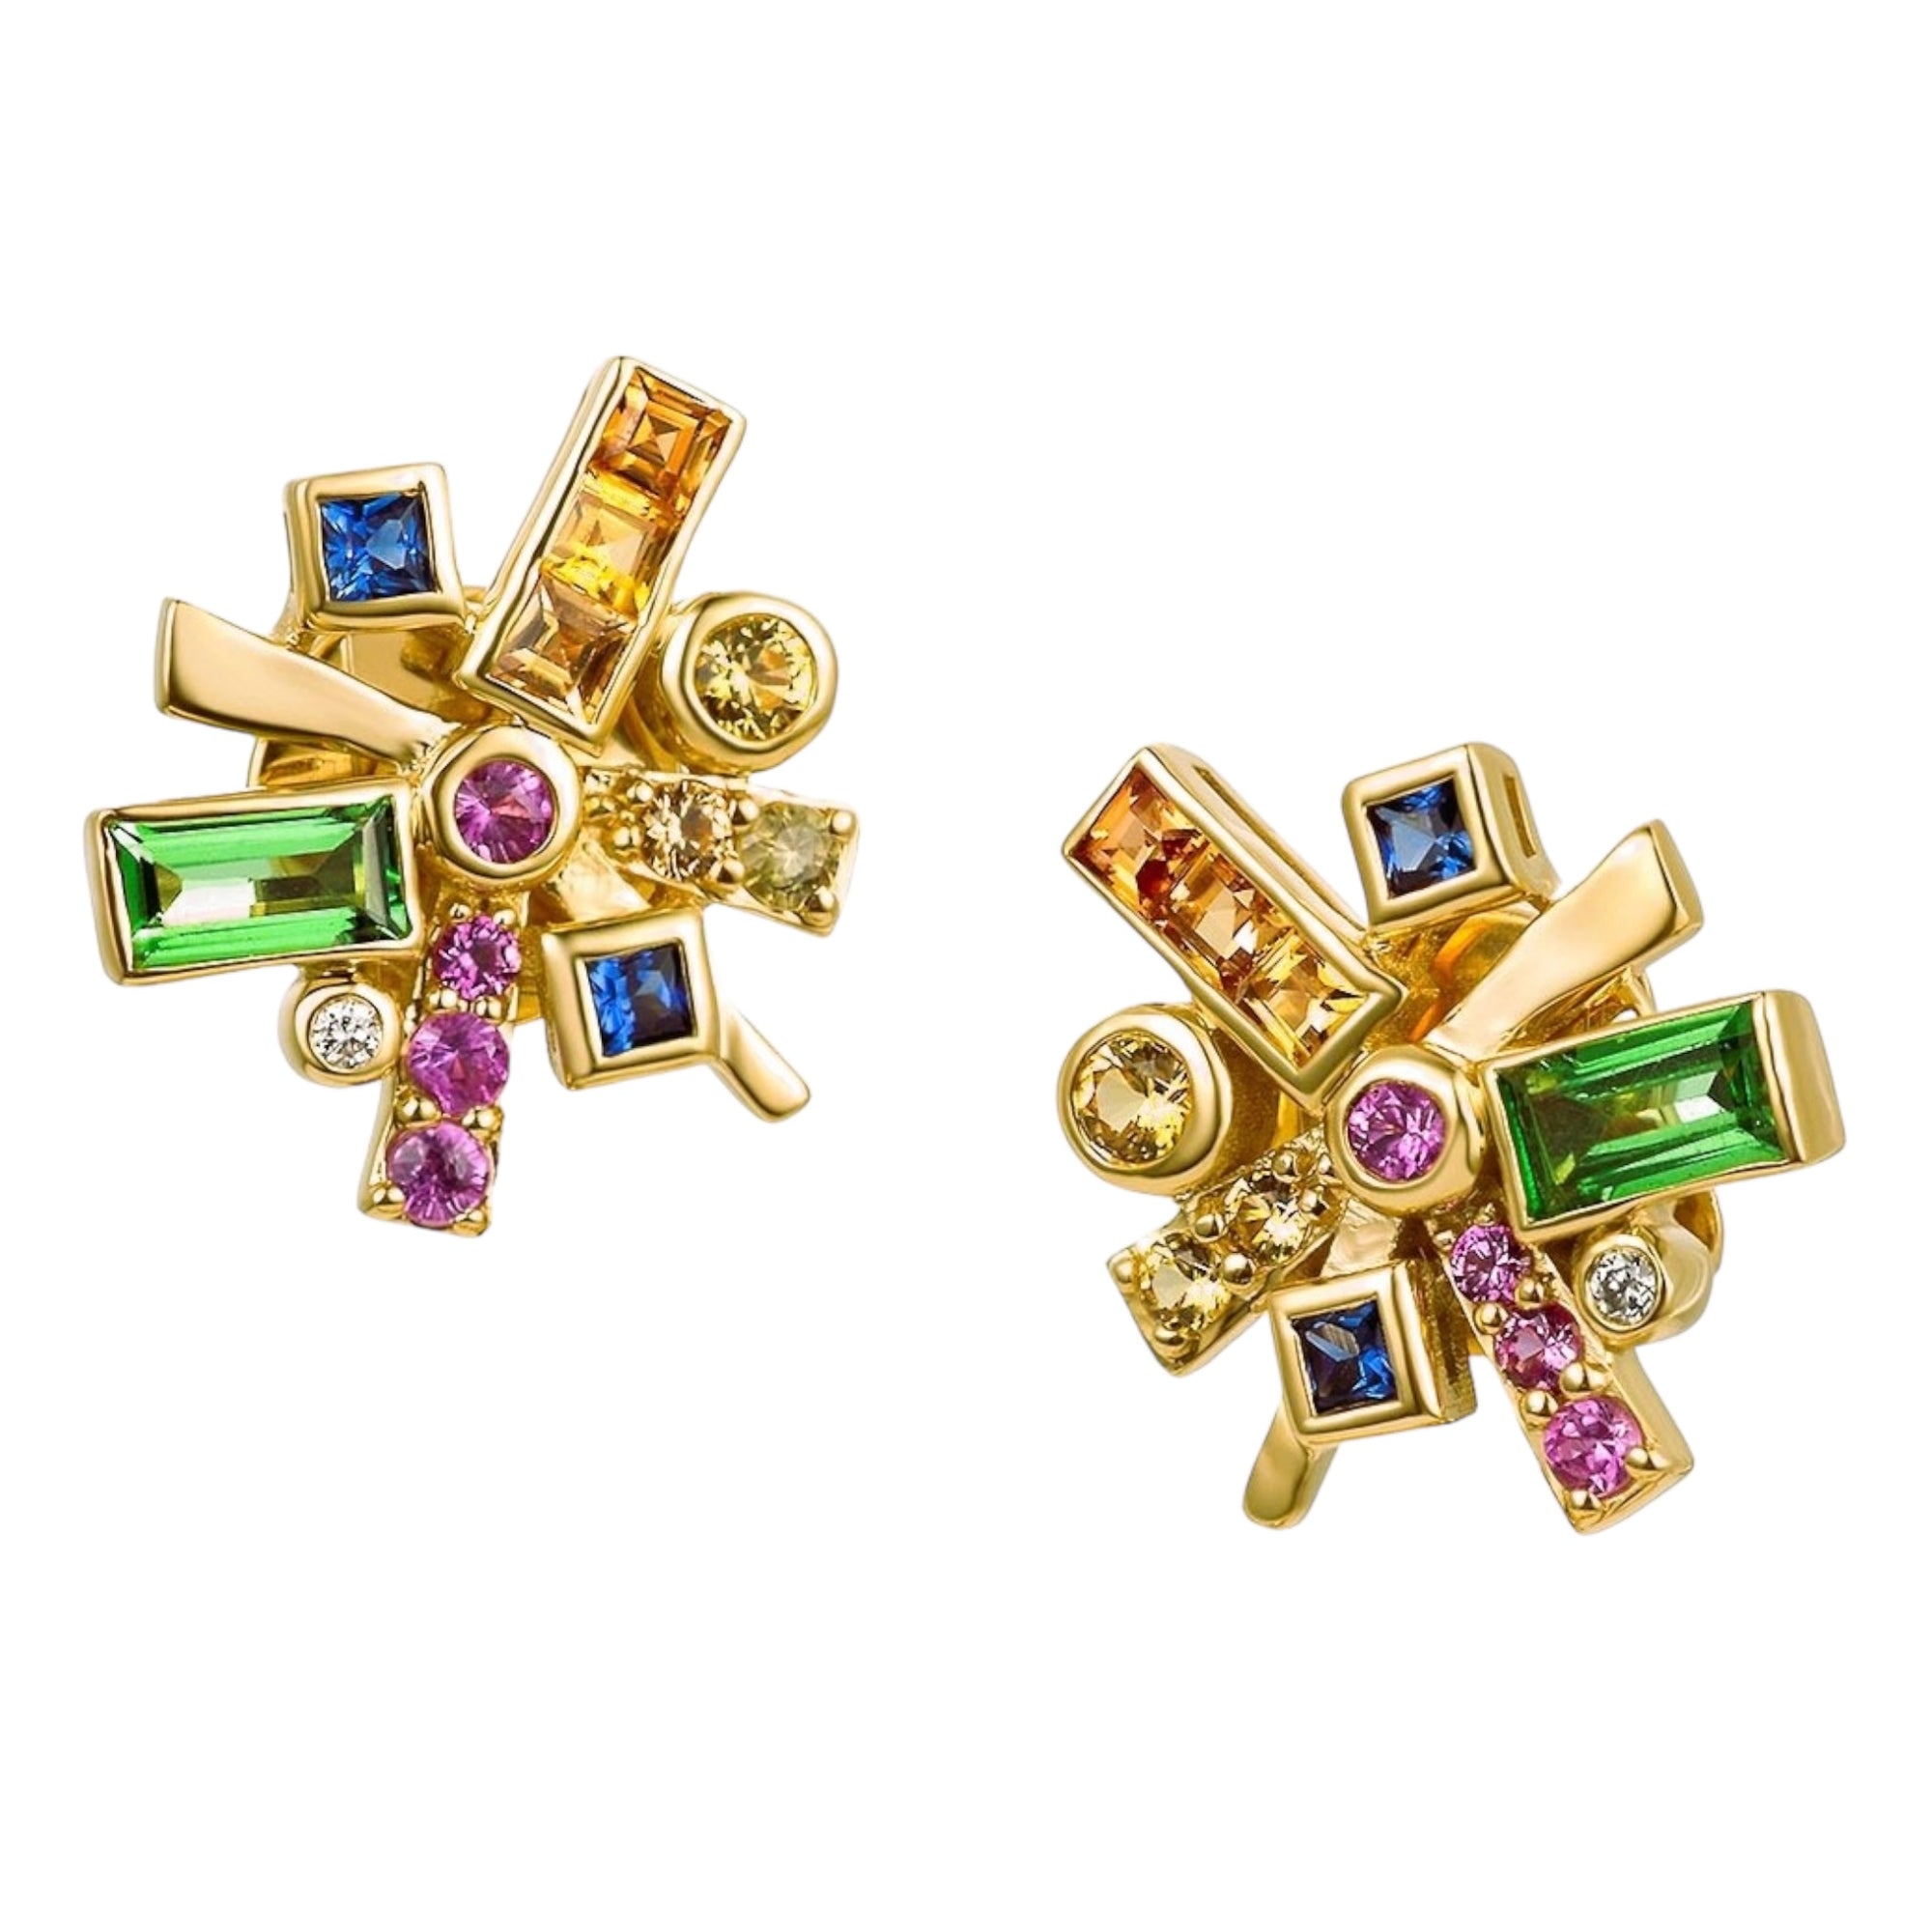 Shooting Stars Earrings by Martha Seely available at Talisman Collection Fine Jewelers in El Dorado Hills, CA and online. Stats: Experience a dazzling explosion of color with our Shooting Stars Small post earrings - crafted in 14k yellow gold and adorned with 3.20 carats of stunning multi-color sapphires, luscious tsavorites, and sparkling 0.08 cts of diamonds. Suspended from the post, these earrings delicately dangle just under your ear, measuring 25 x 21mm. 